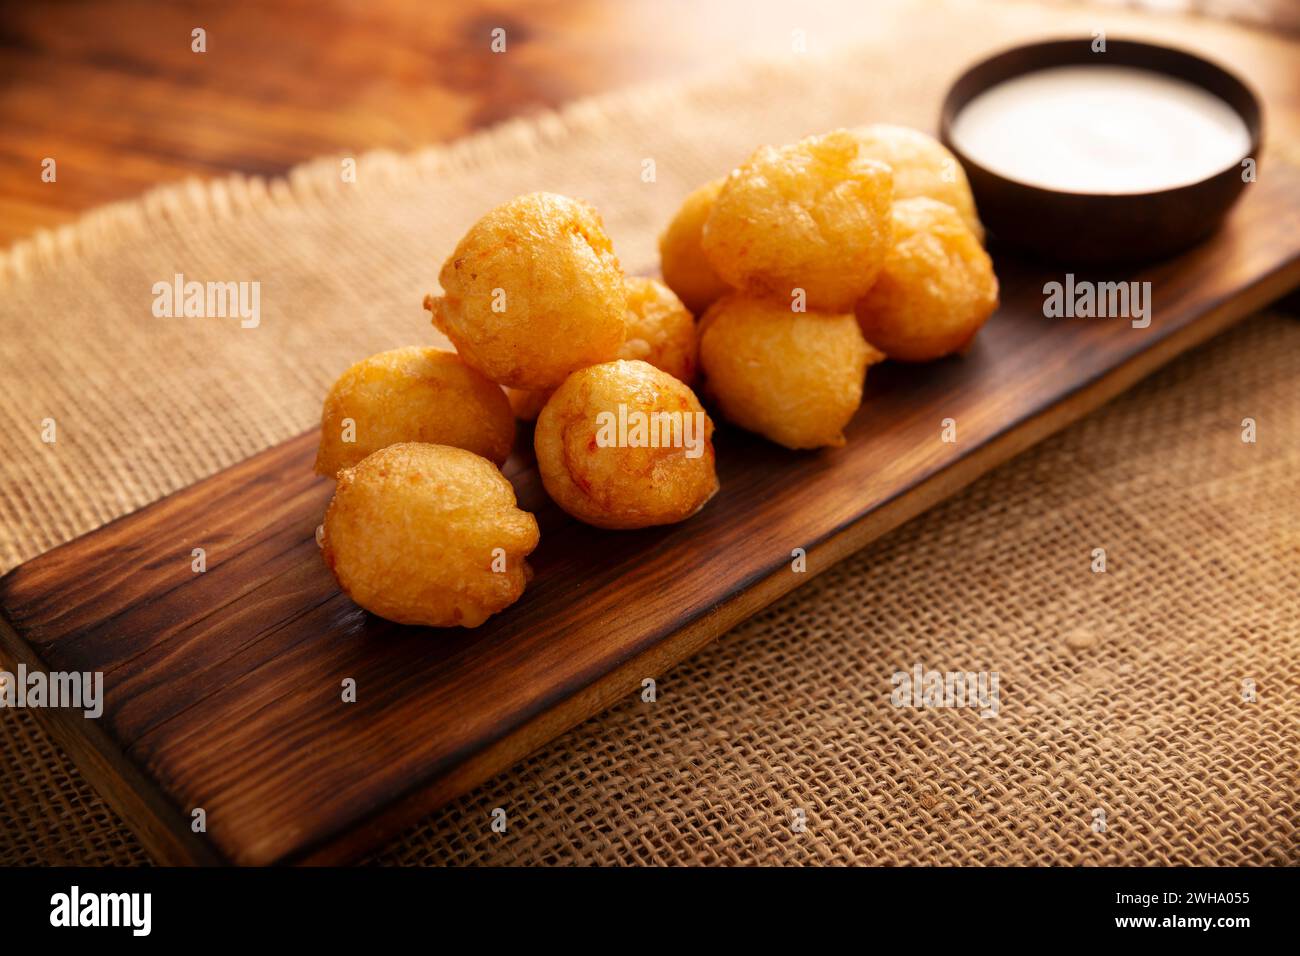 Fried breaded cheese balls, easy and delicious homemade snack recipe. Served with dipping sauce. Stock Photo